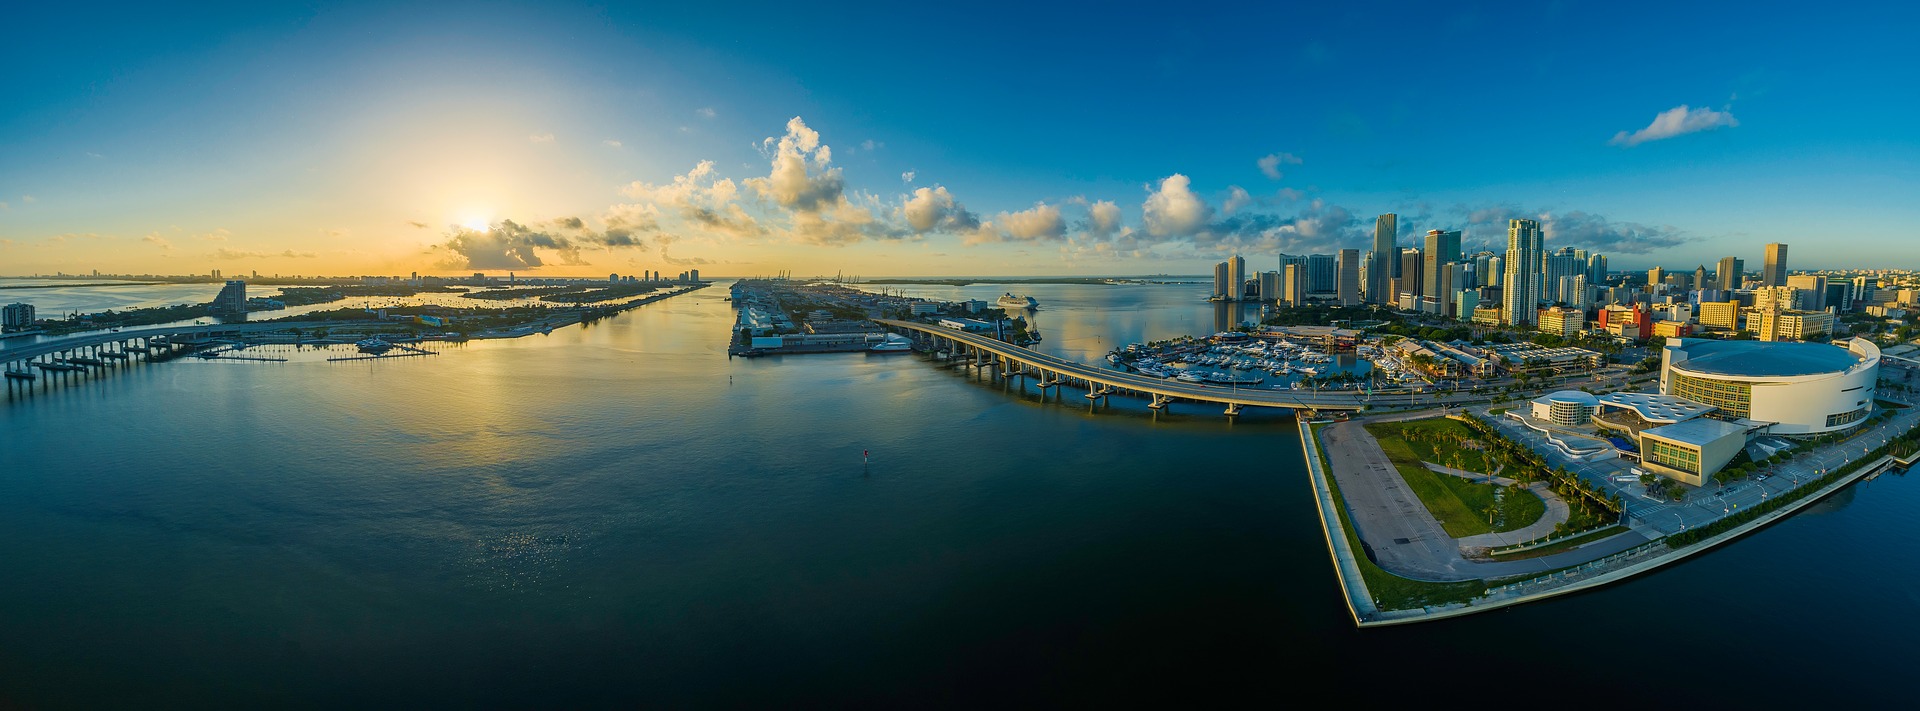 Panorama View of Miami, Florida | Breast Cancer Car Donations